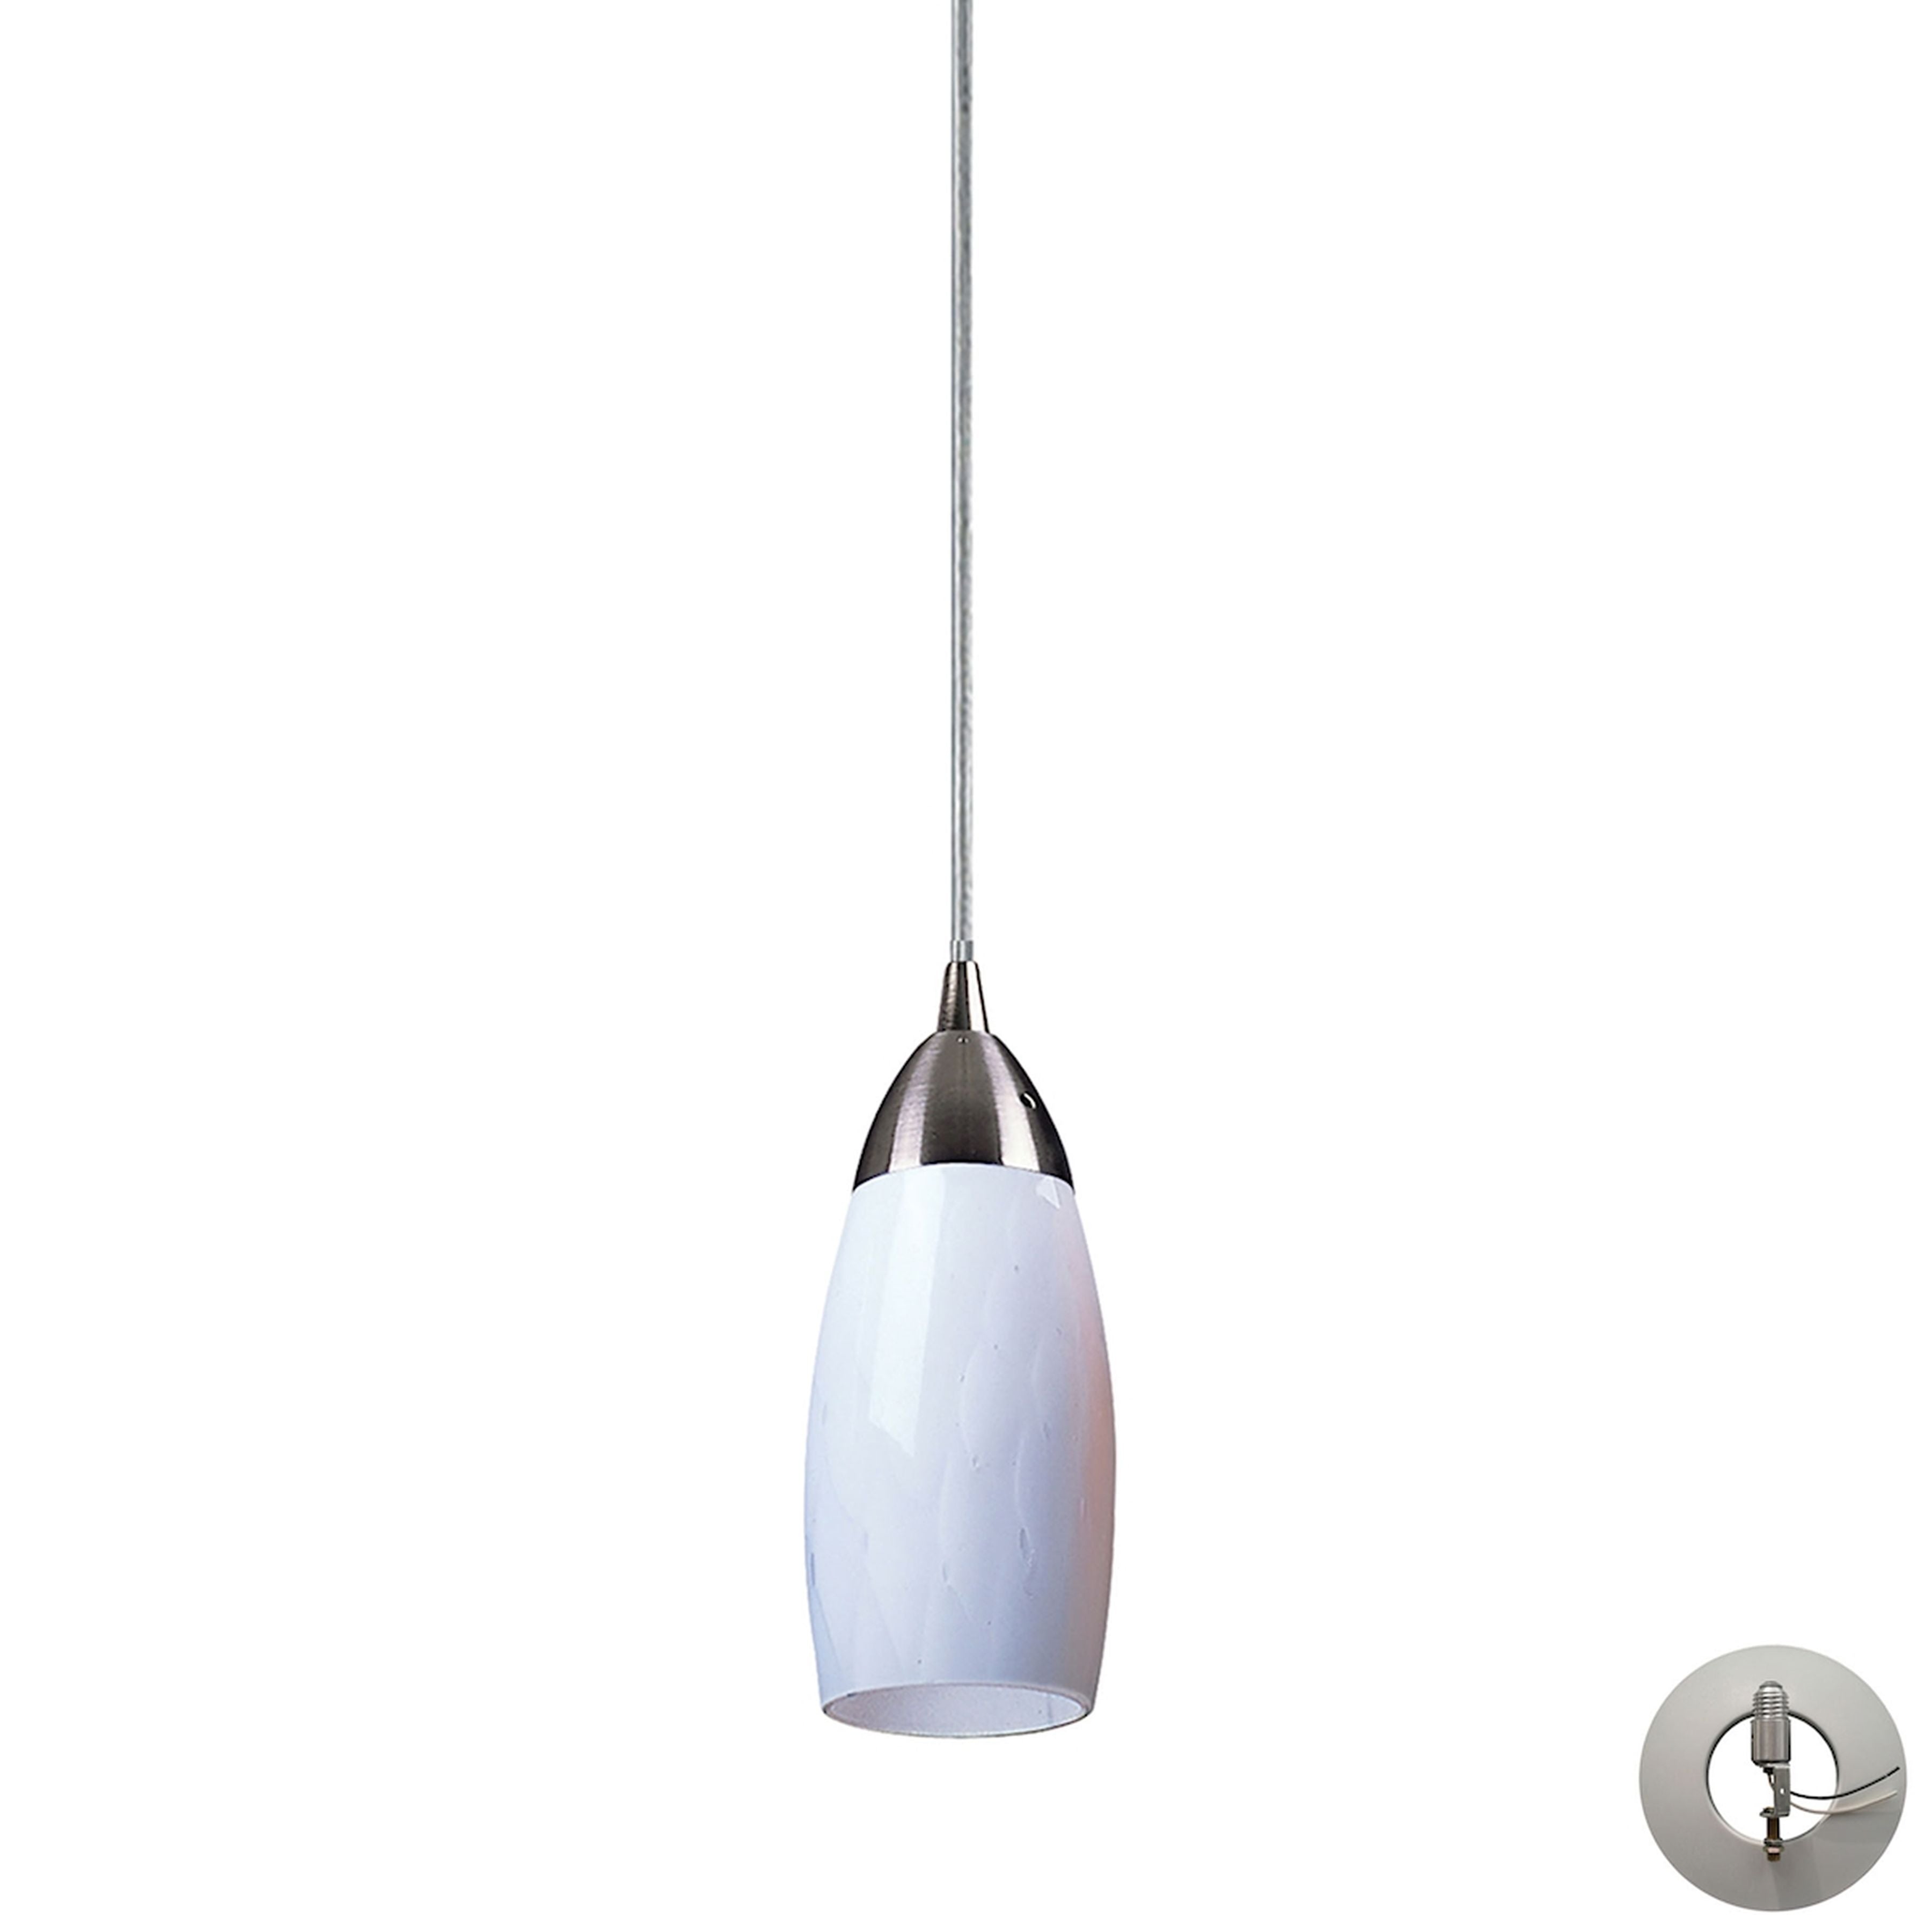 Elk Lighting Milan 3'' Wide 1-Light Pendant - Satin Nickel with Simple White Glass (Includes Adapter Kit)